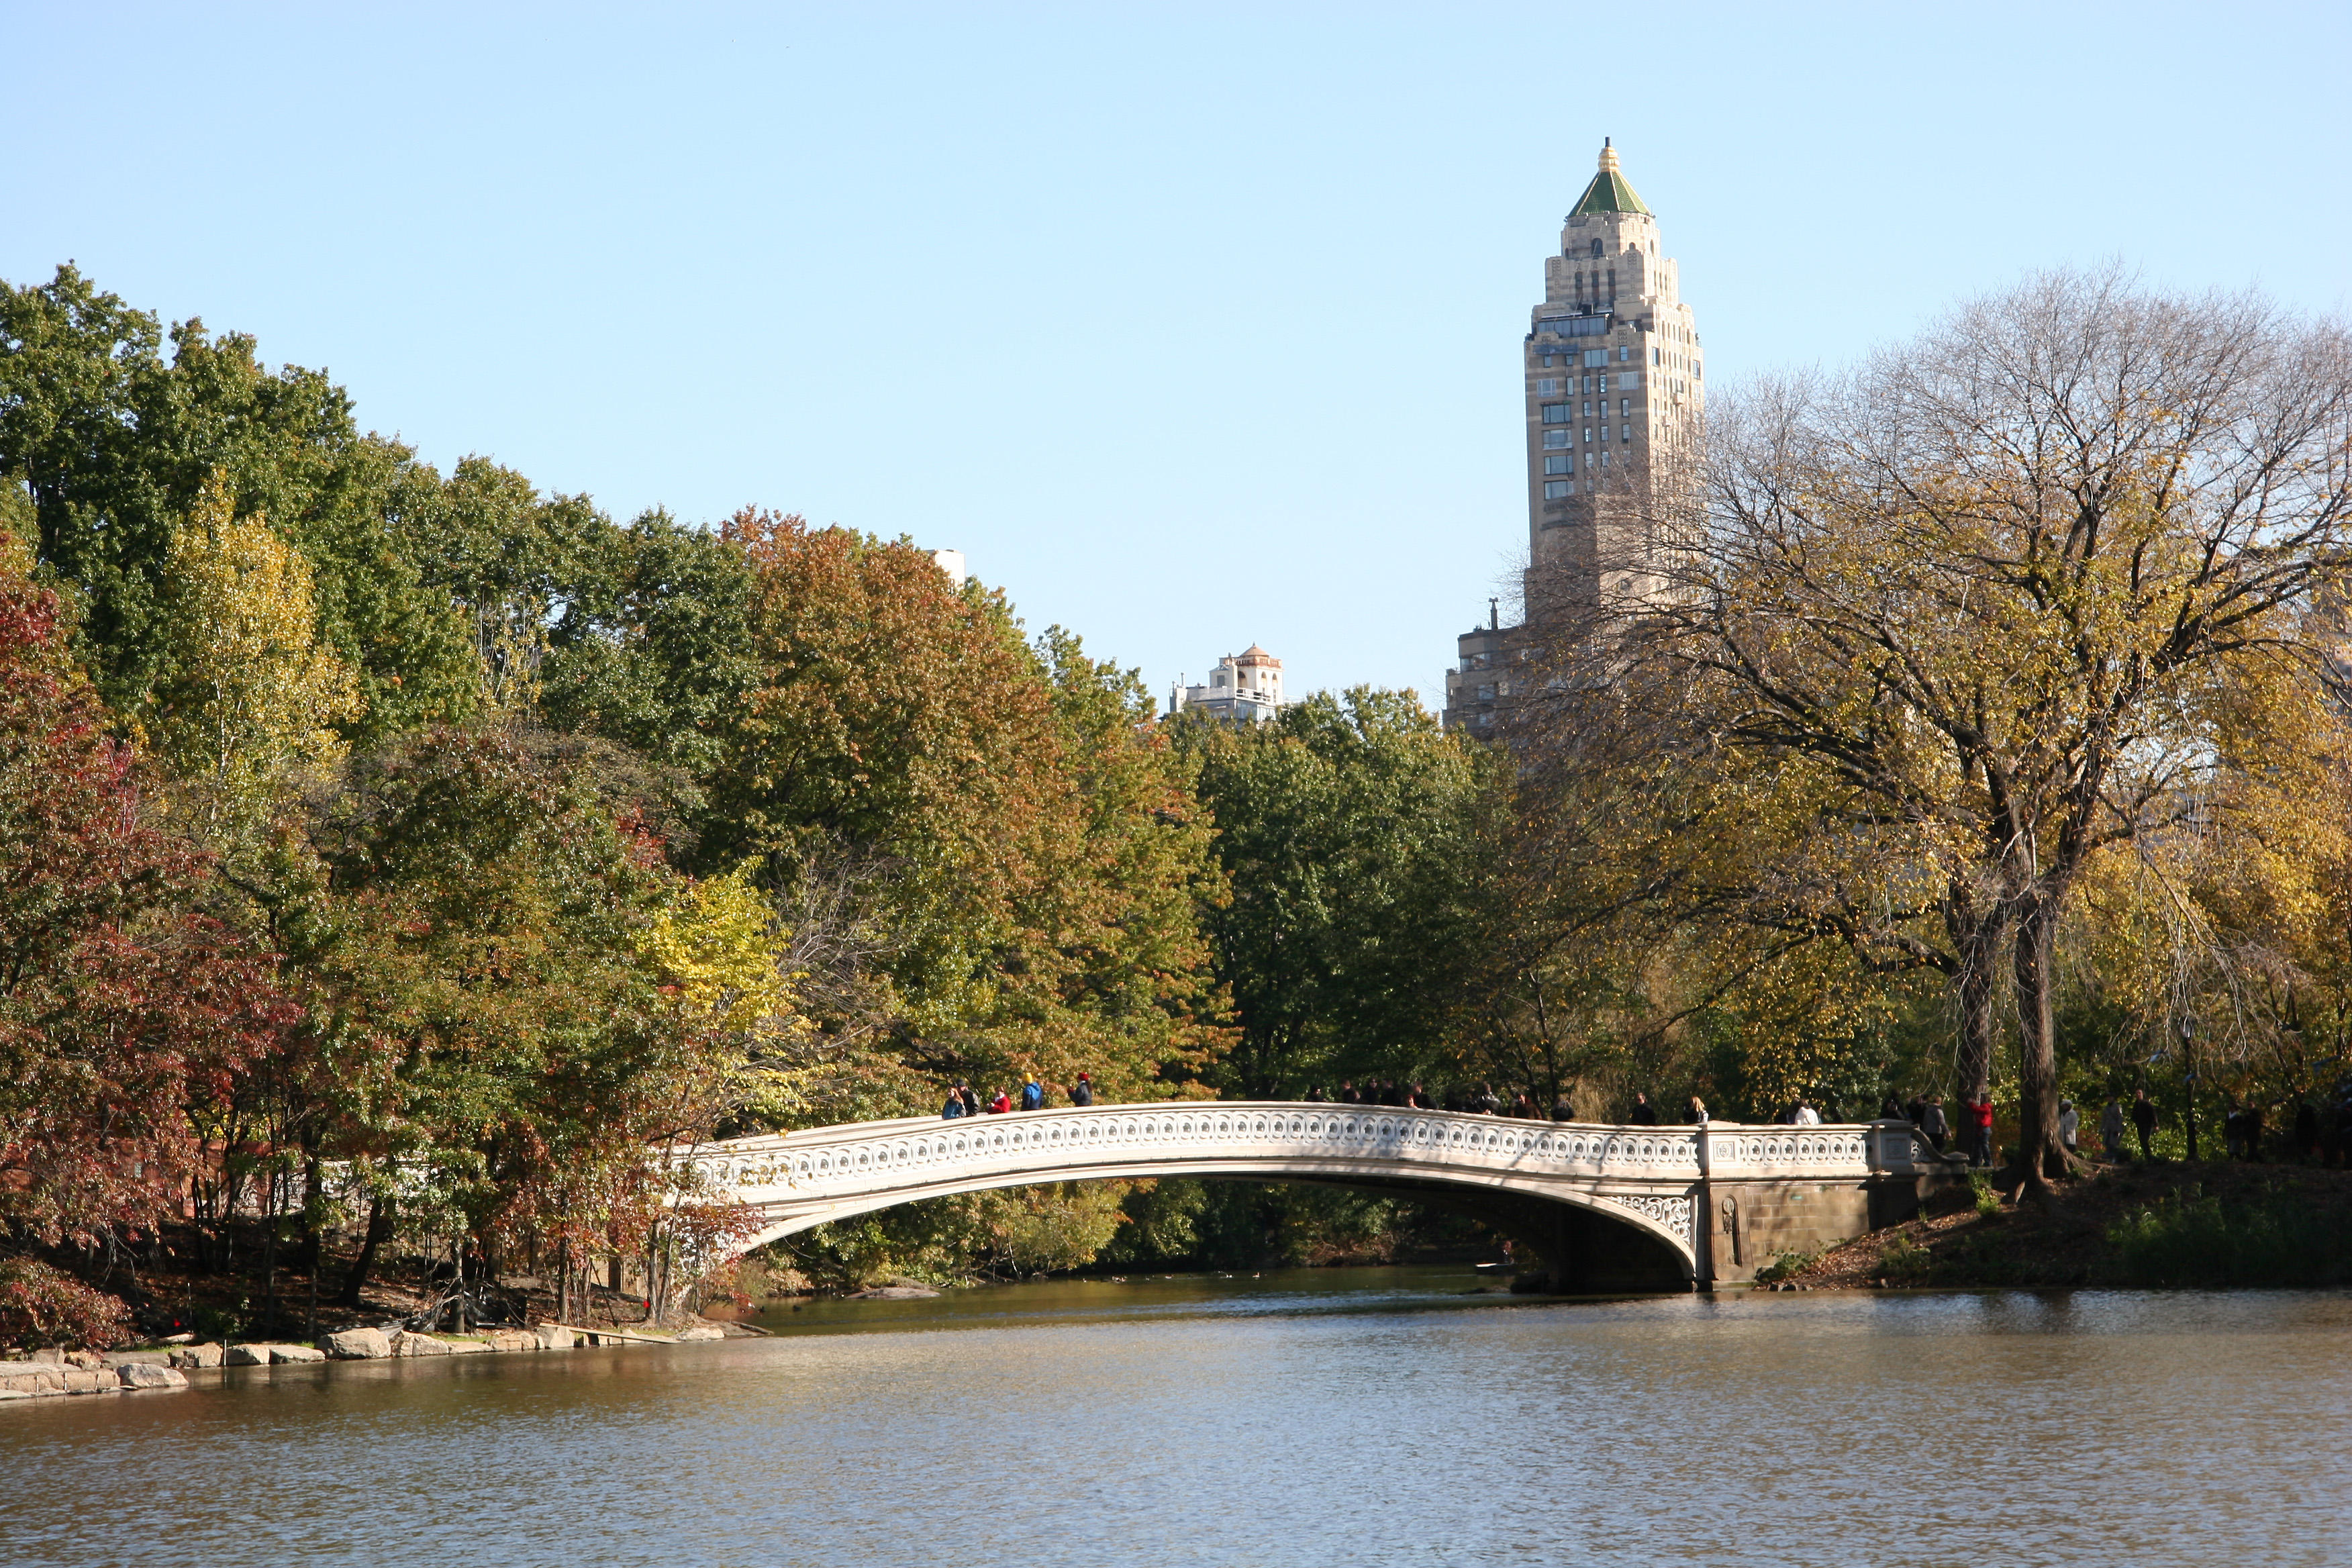 Bow Bridge from the West Shore